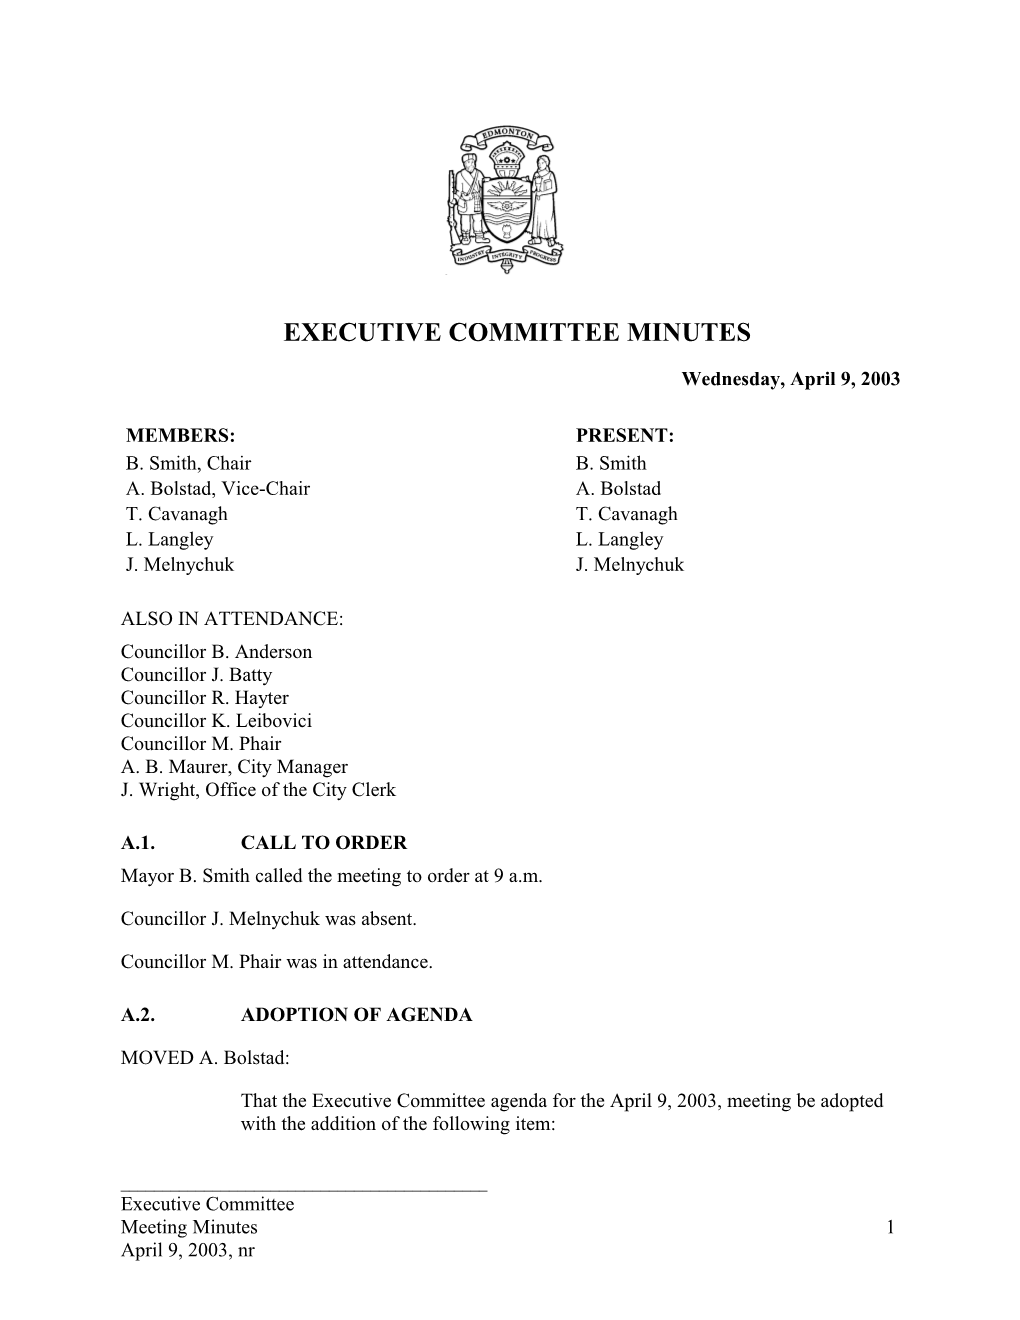 Minutes for Executive Committee April 9, 2003 Meeting